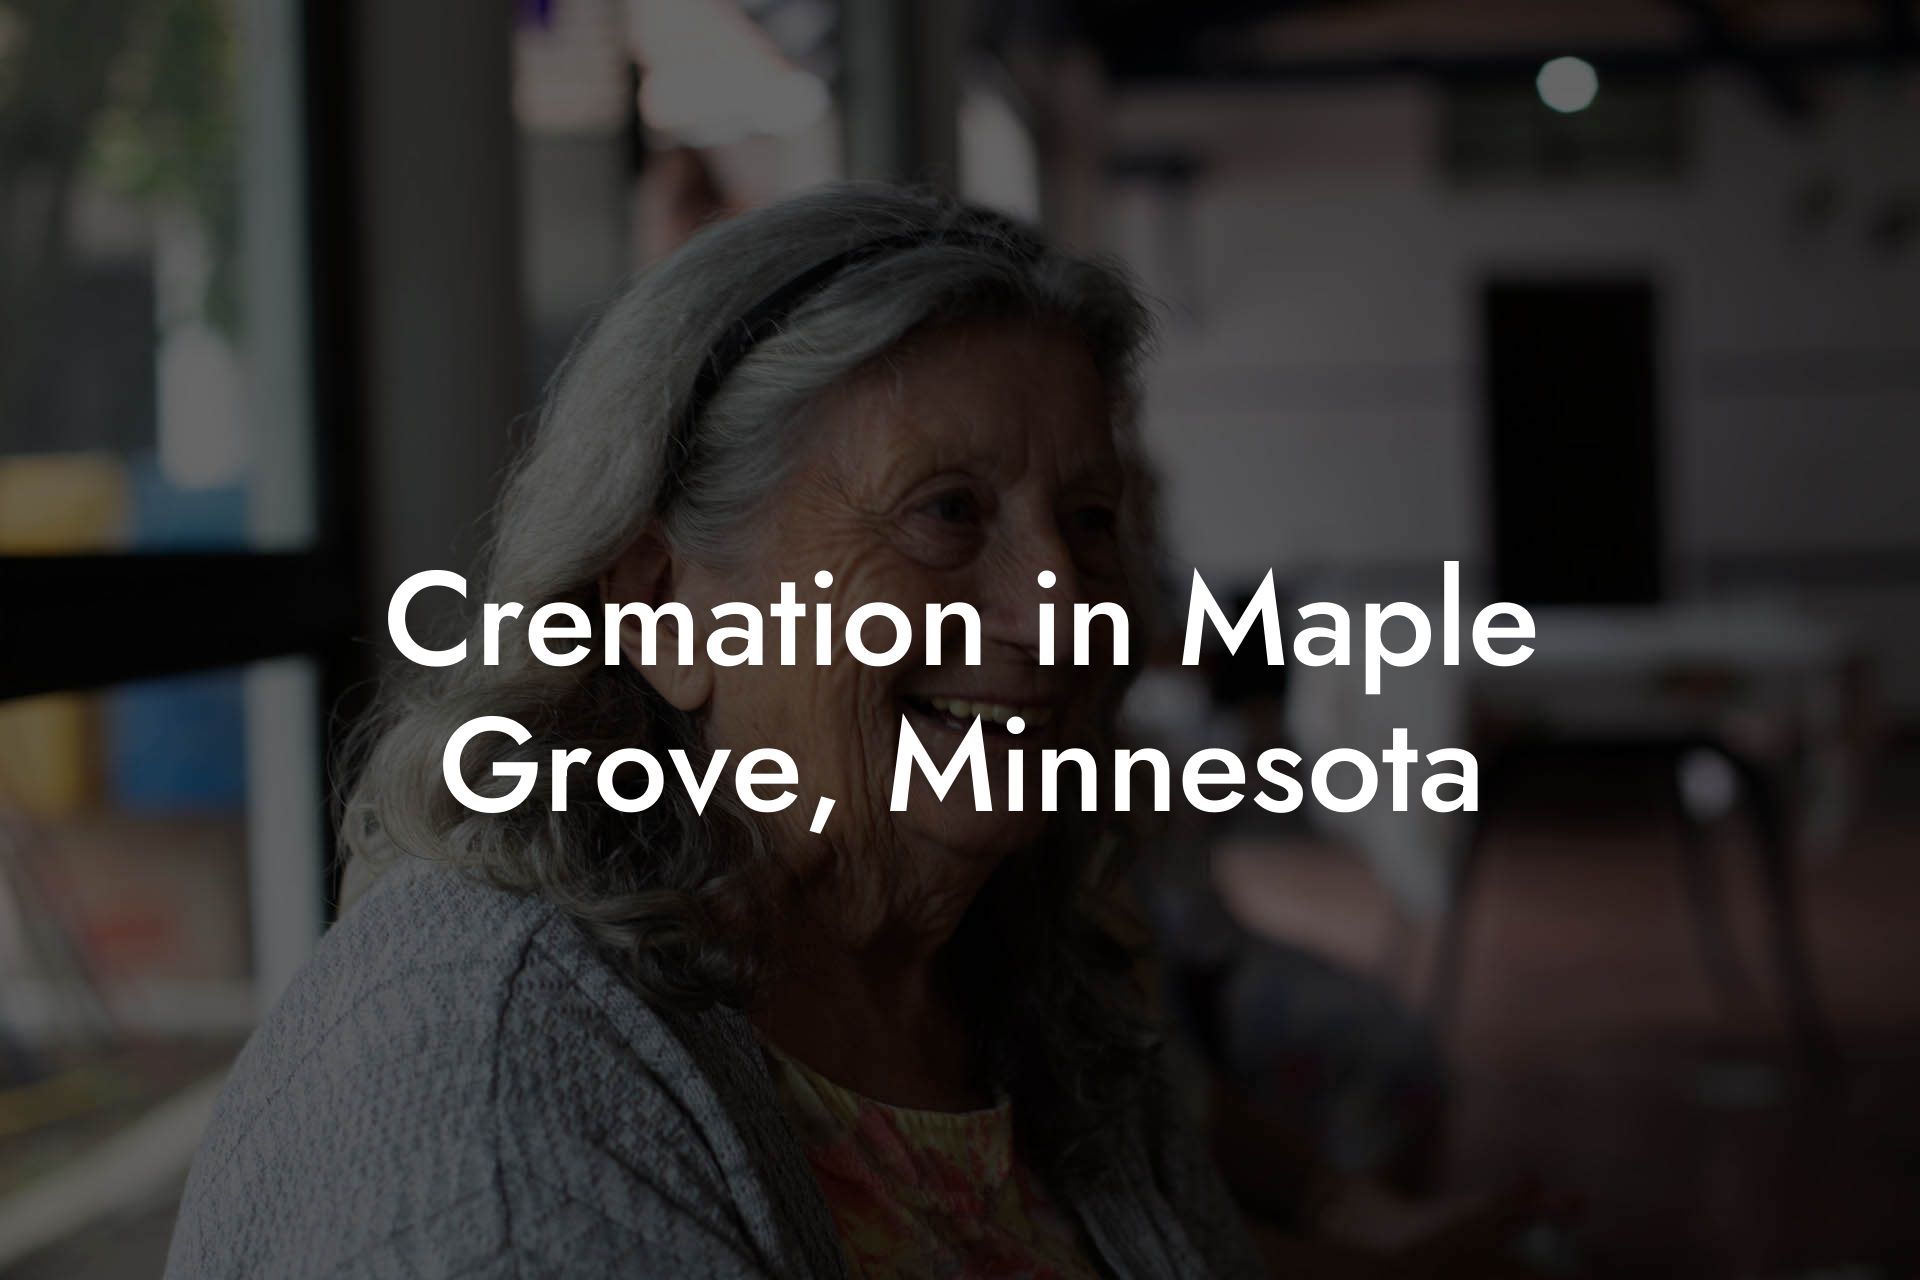 Cremation in Maple Grove, Minnesota